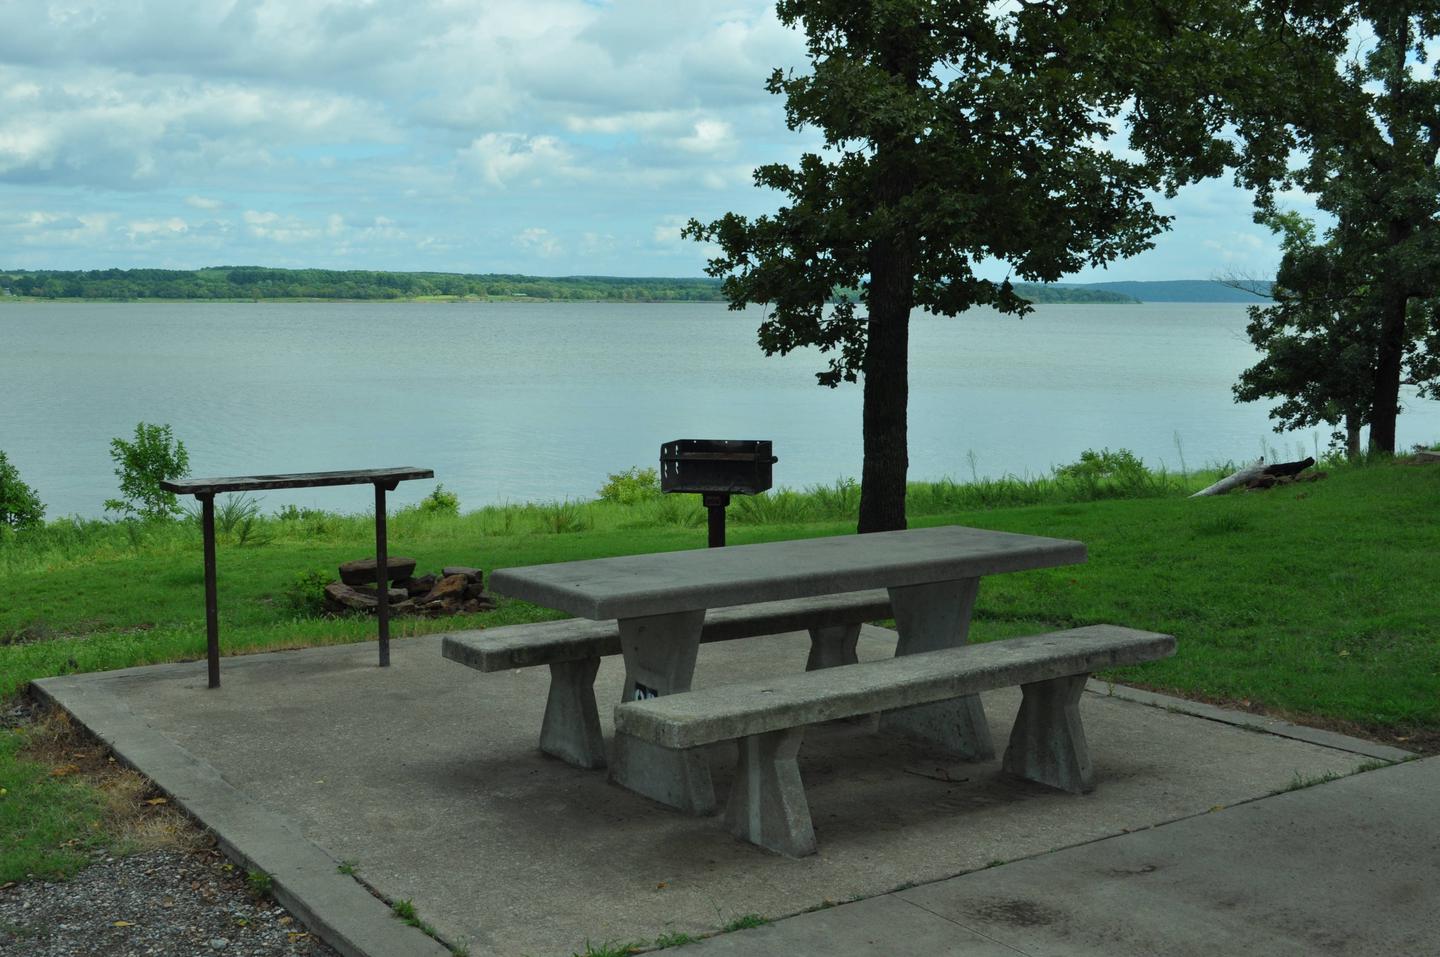 Site 92 offers an excellent view of Fort Gibson Lake.Site 92 - Taylor Ferry